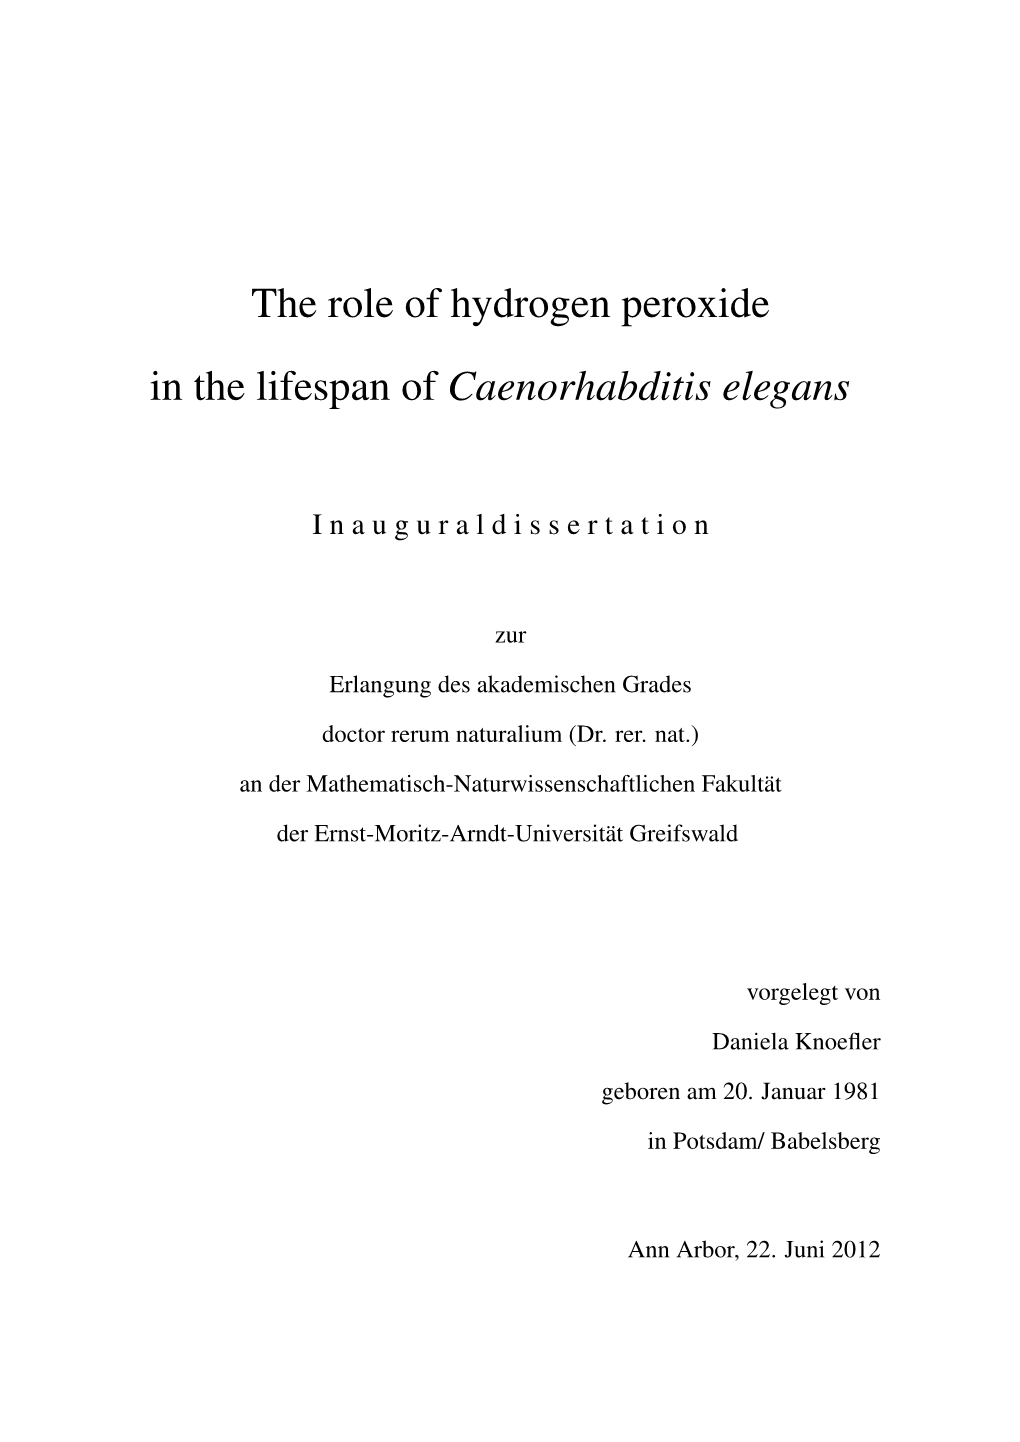 Role of Hydrogen Peroxide in the Lifespan of C. Elegans